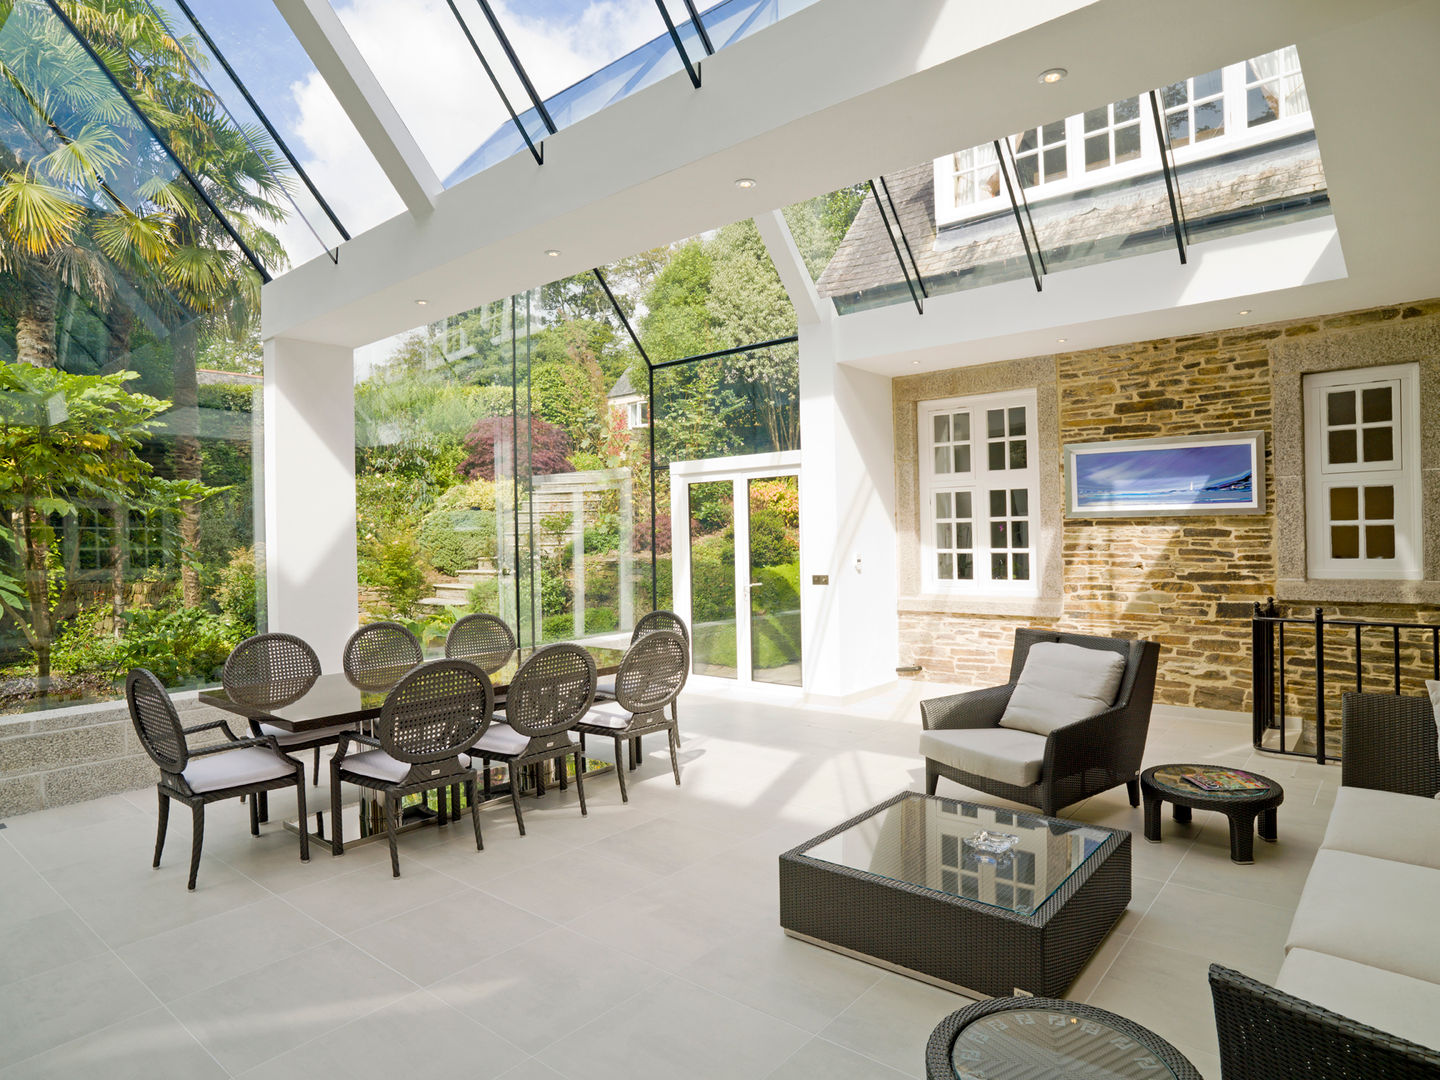 Structural Glass Conservatory, Cornwall homify モダンスタイルの 温室 ガラス